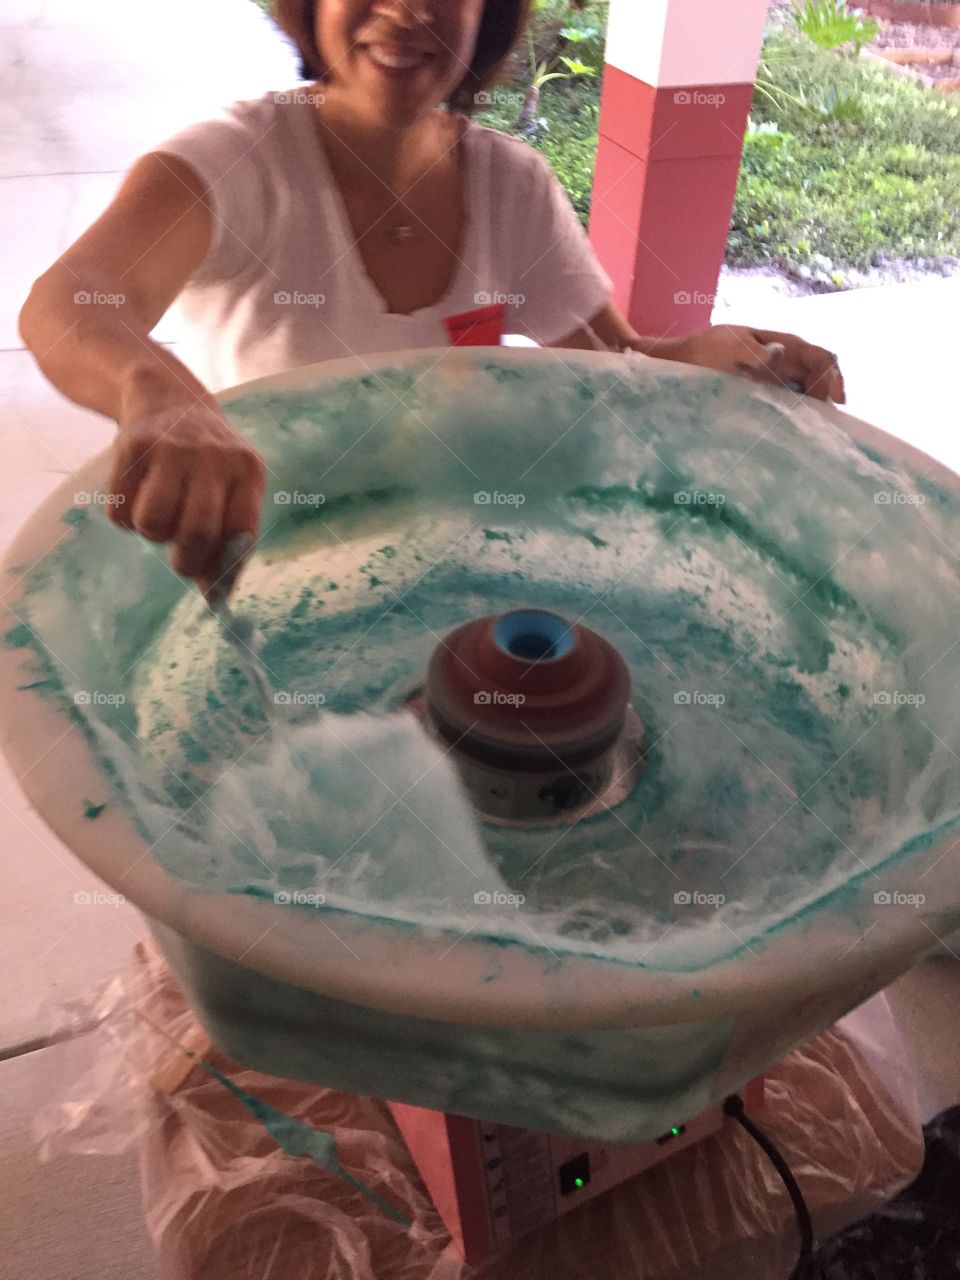 Creating cotton candy